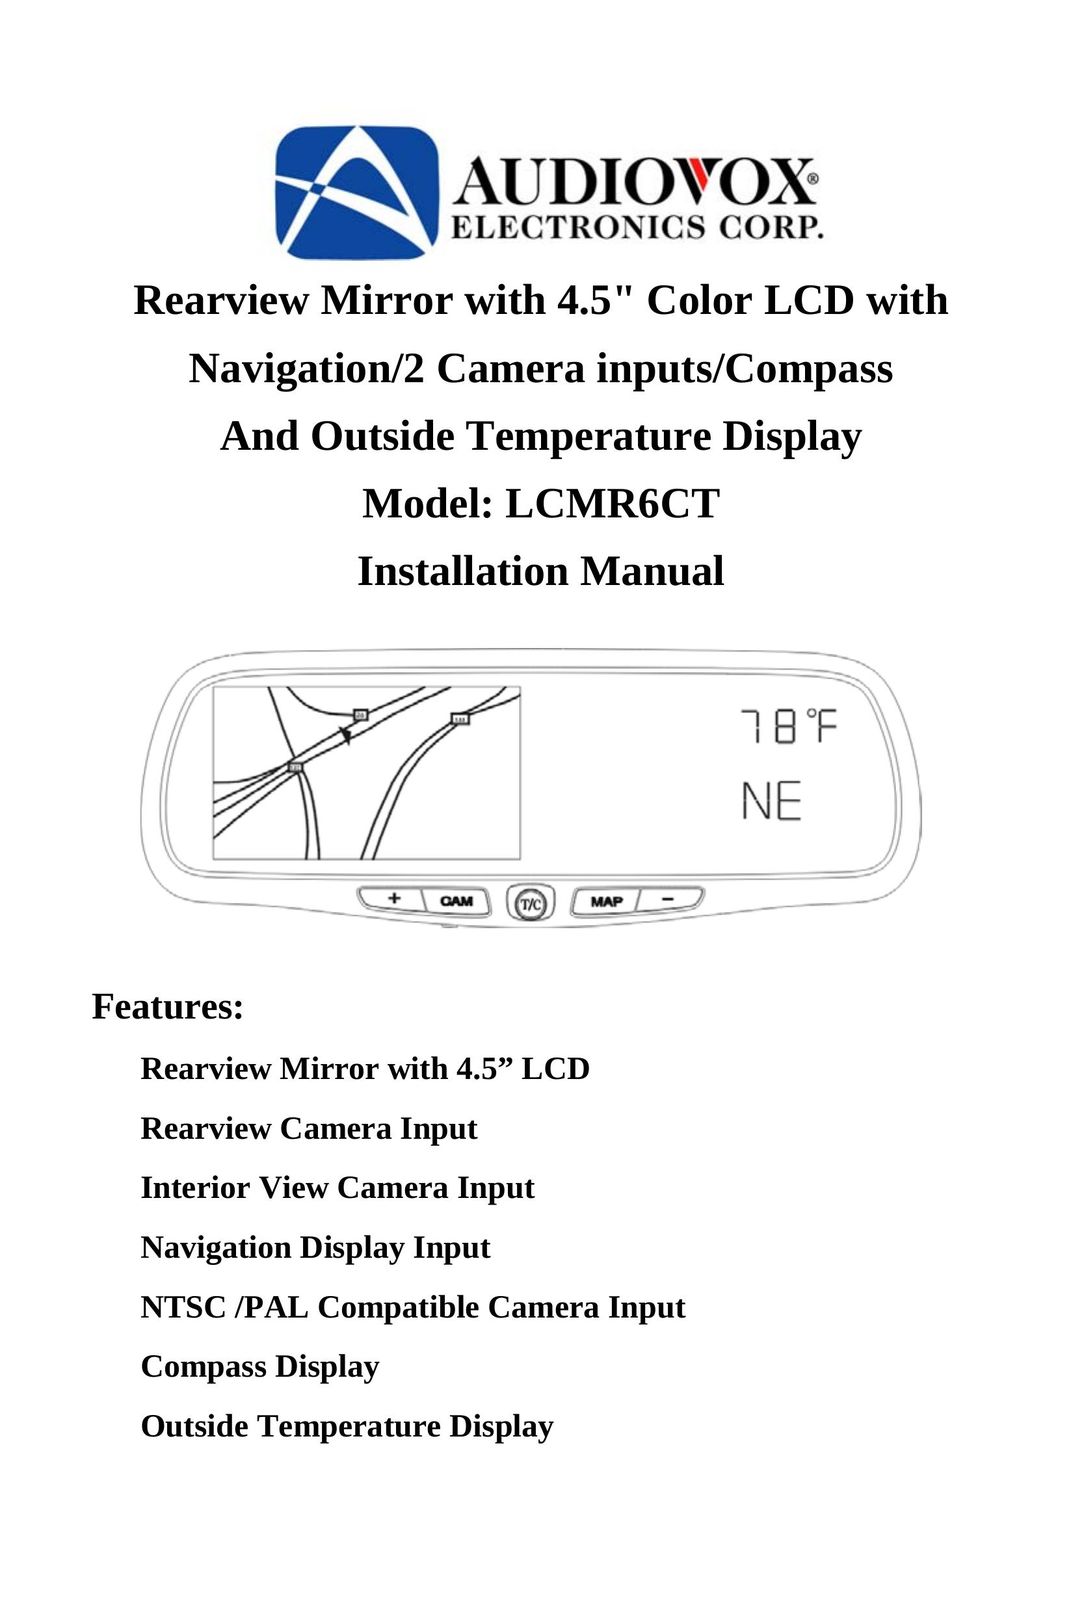 Audiovox LCMR6CT CRT Television User Manual